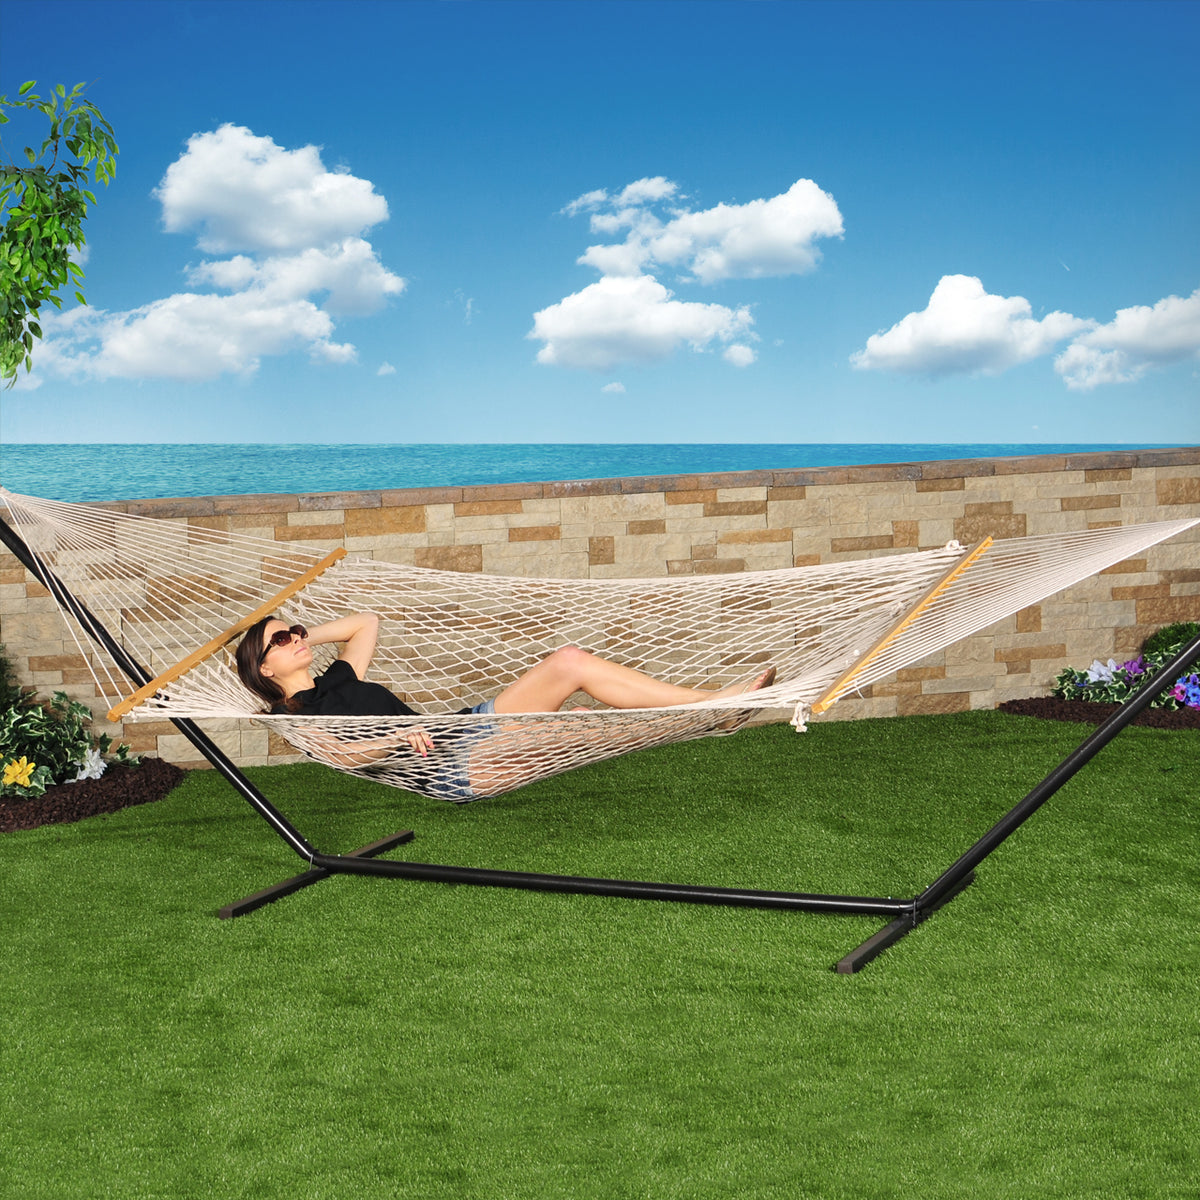 Woman laying outside in a hammock secured to the 15-foot black stand.